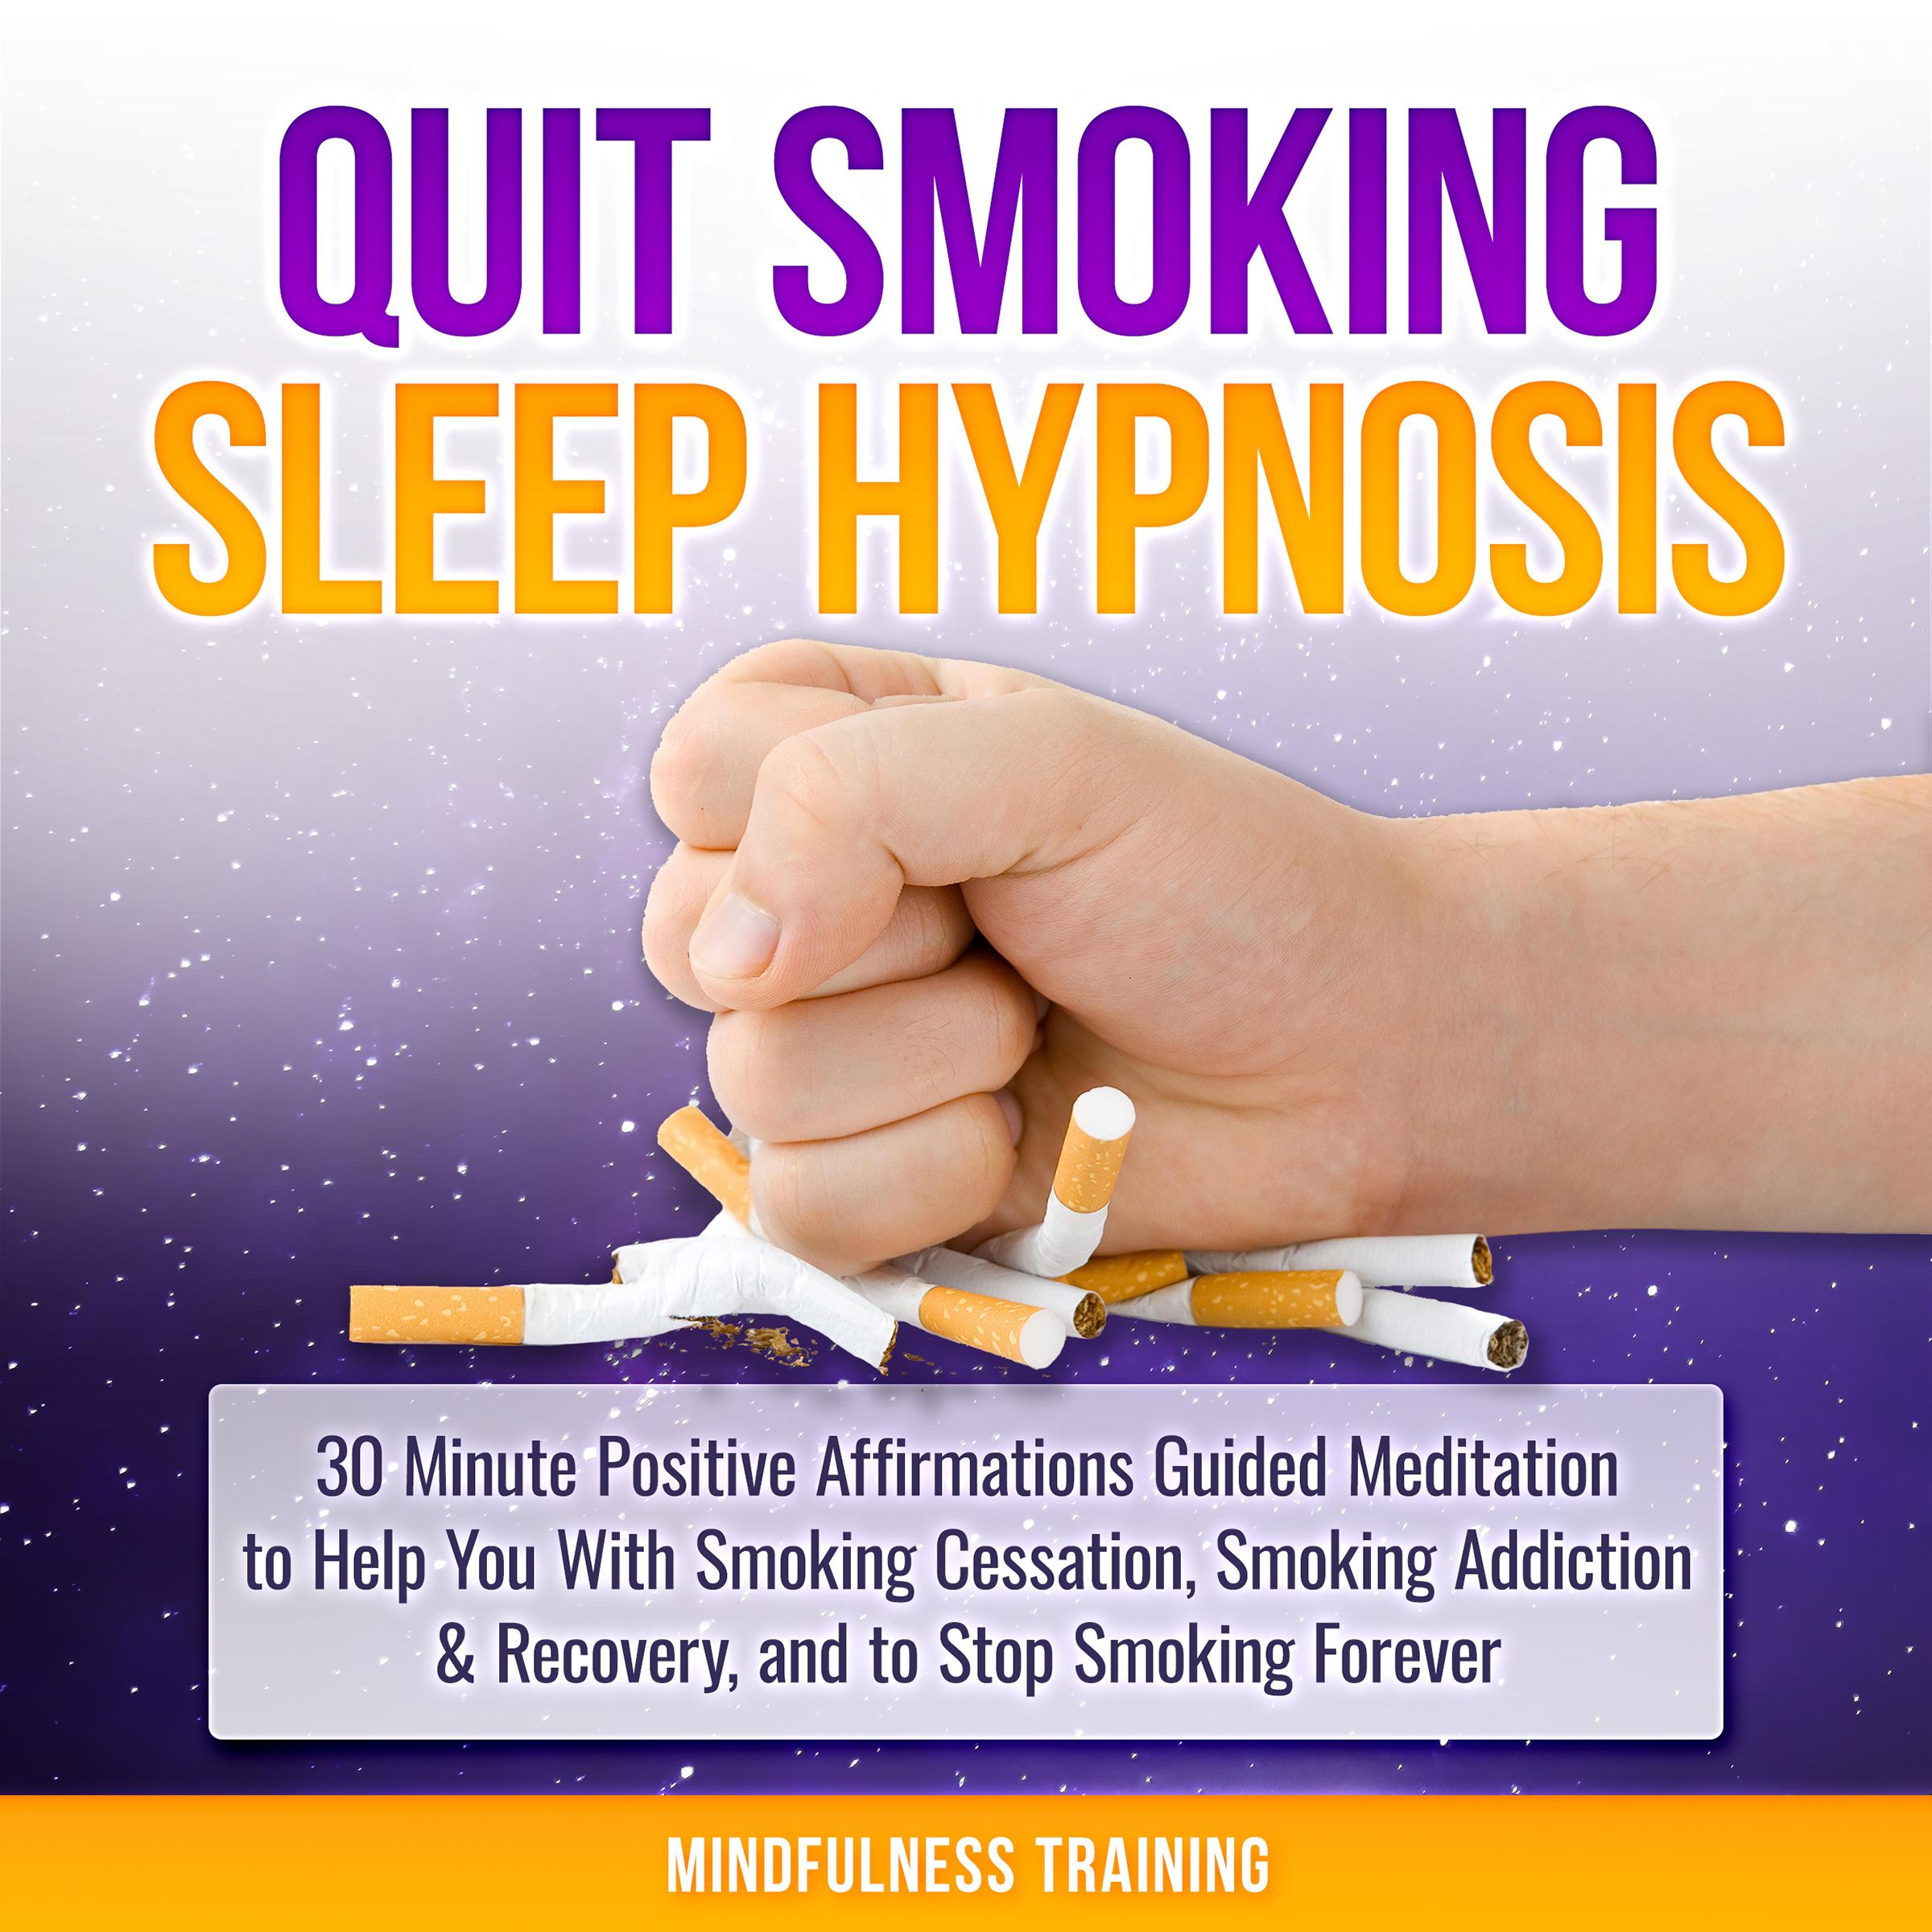 Quit Smoking Sleep Hypnosis: 30 Minute Positive Affirmations Guided Meditation to Help You With Smoking Cessation, Smoking Addiction & Recovery, and to Stop Smoking Forever (Quit Smoking Series Book 1)